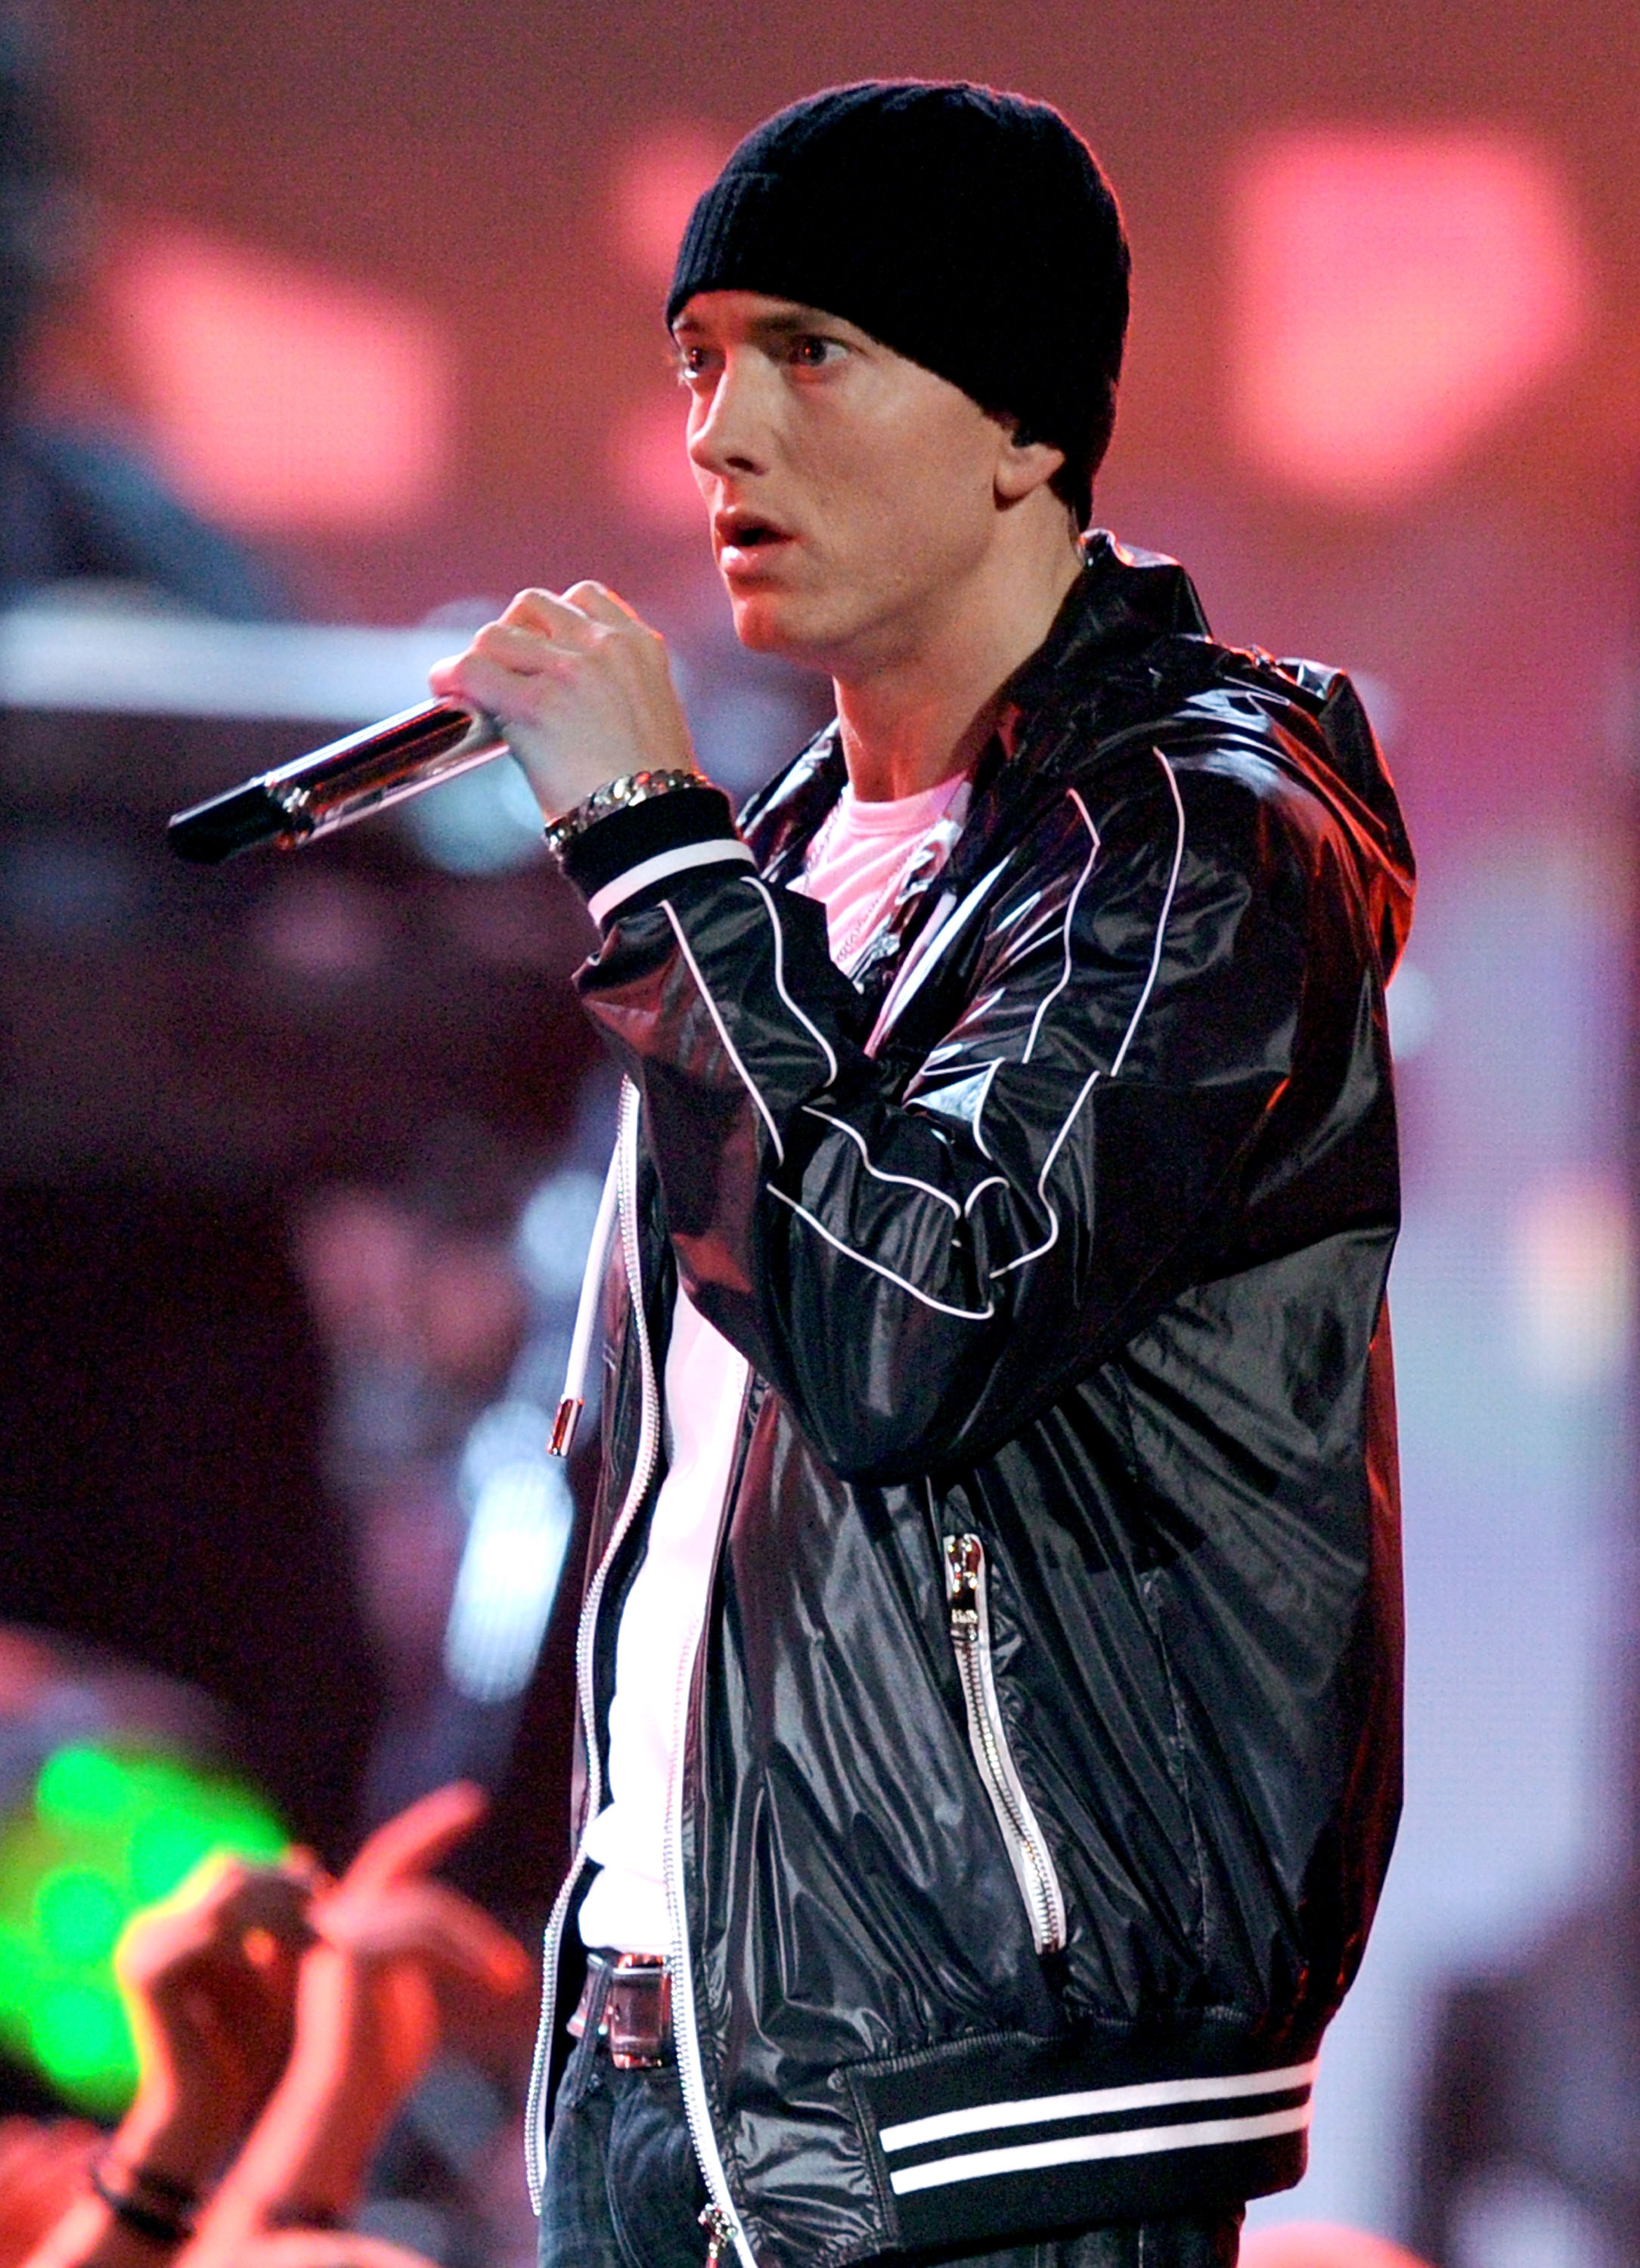 Eminem performs onstage during the 52nd Annual Grammy Awards at Staples Center on January 31, 2010 in Los Angeles, California. | Source: Getty Images